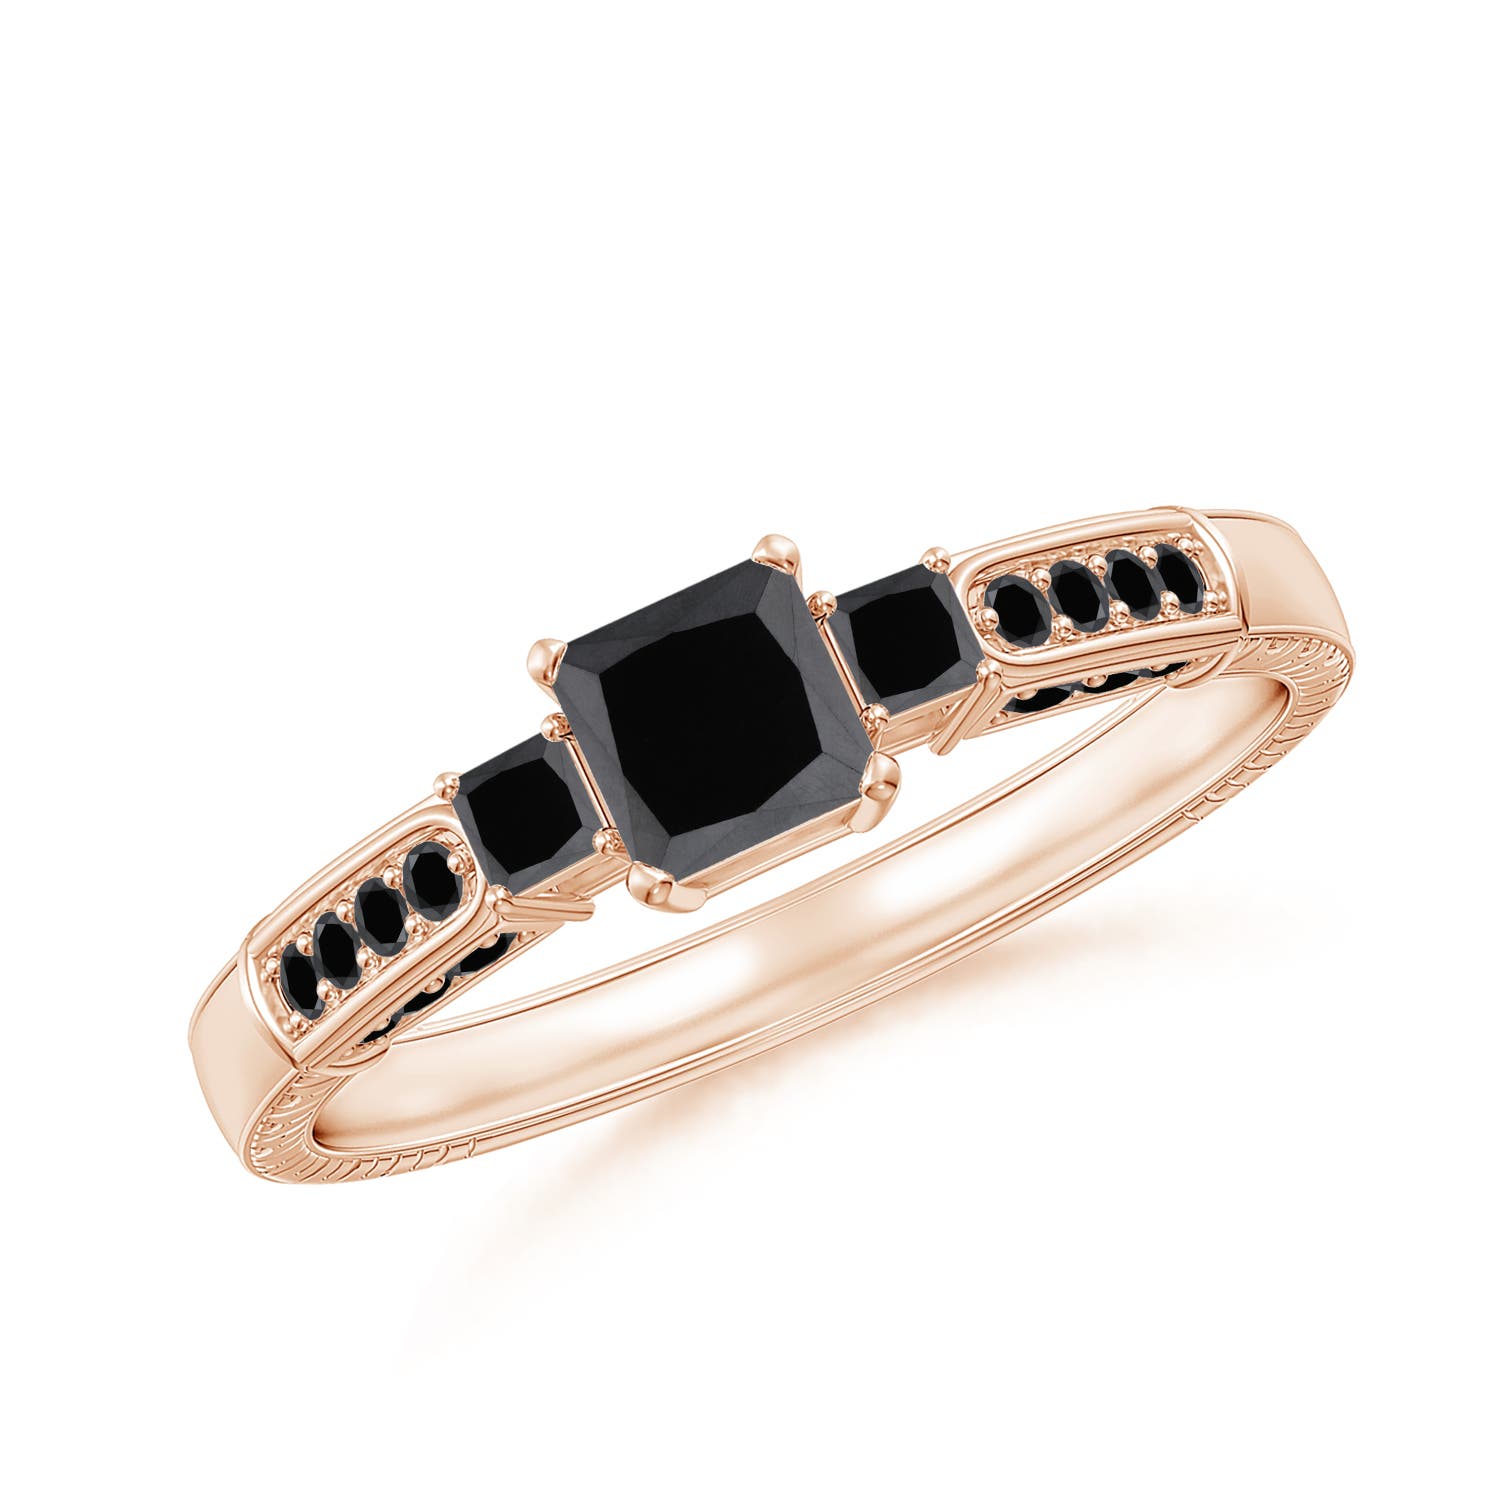 Enchanted Disney Villains Maleficent Princess-Cut Onyx and Diamond Ring in  Sterling Silver with Black Rhodium | Zales